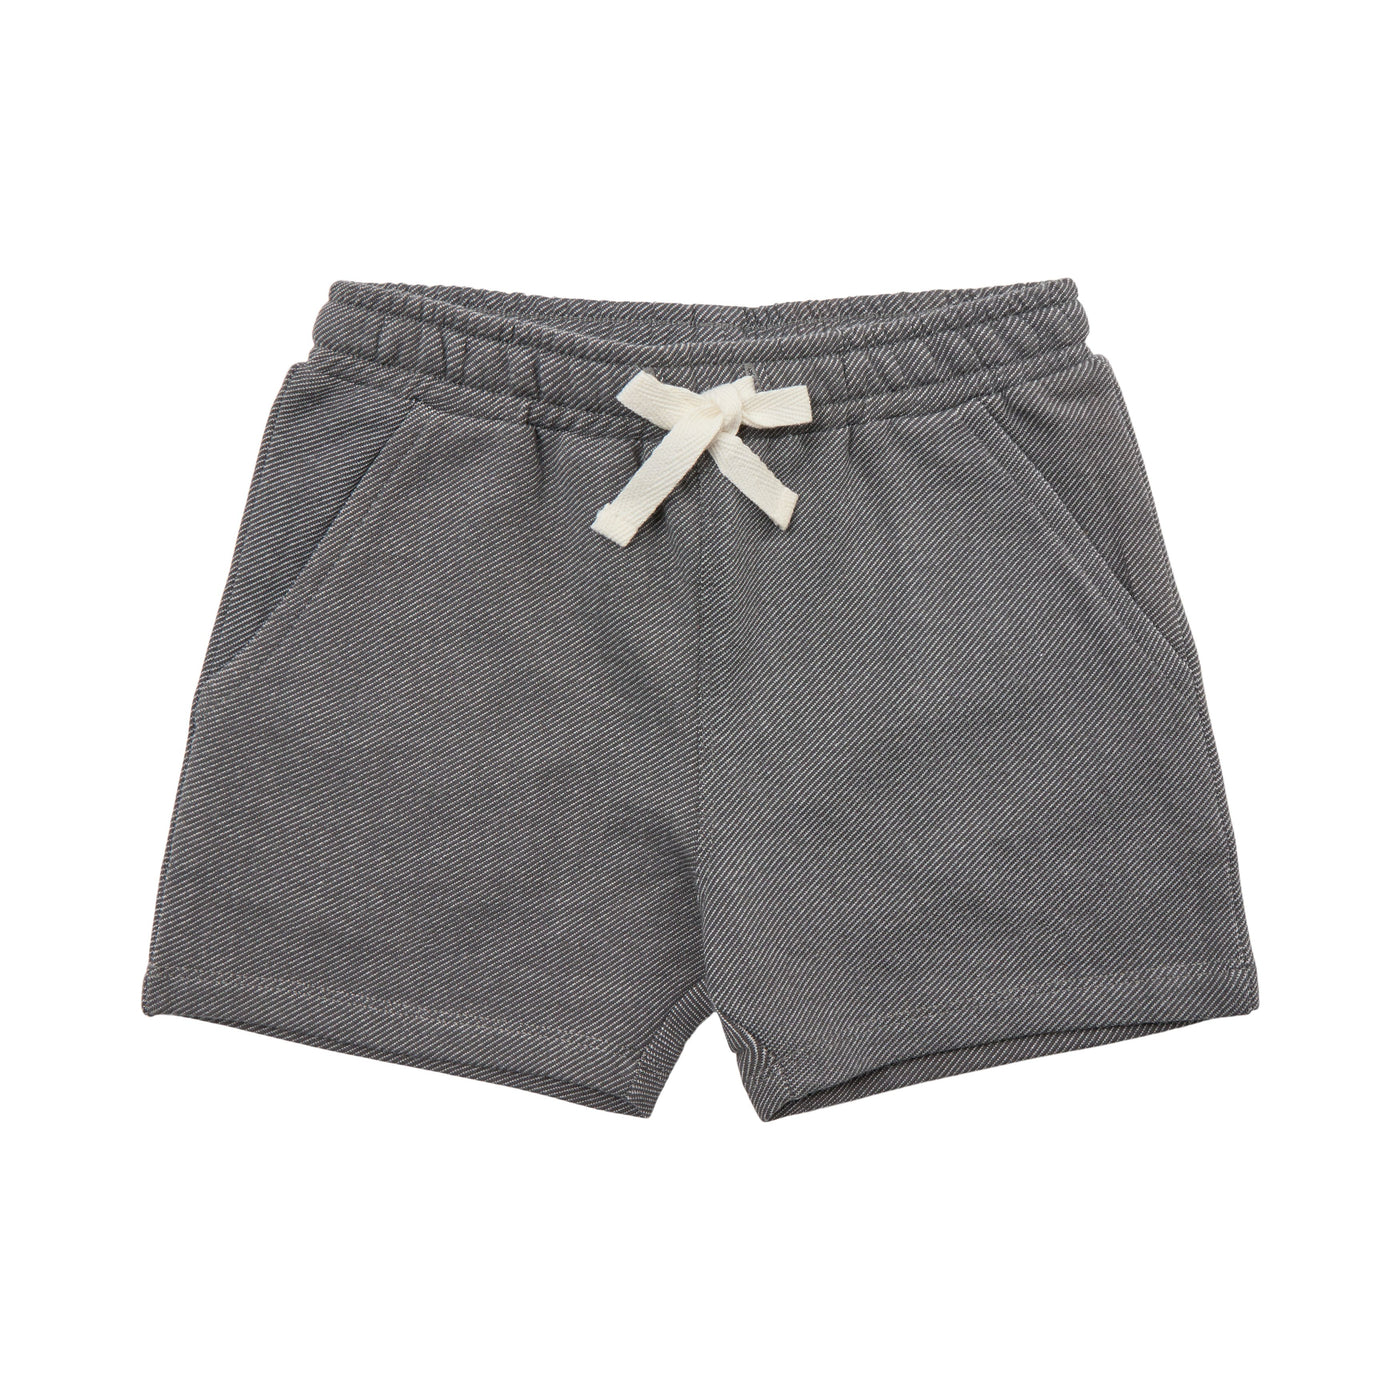 Petit by Sofie Schnoor - Shorts 'Washed Black'